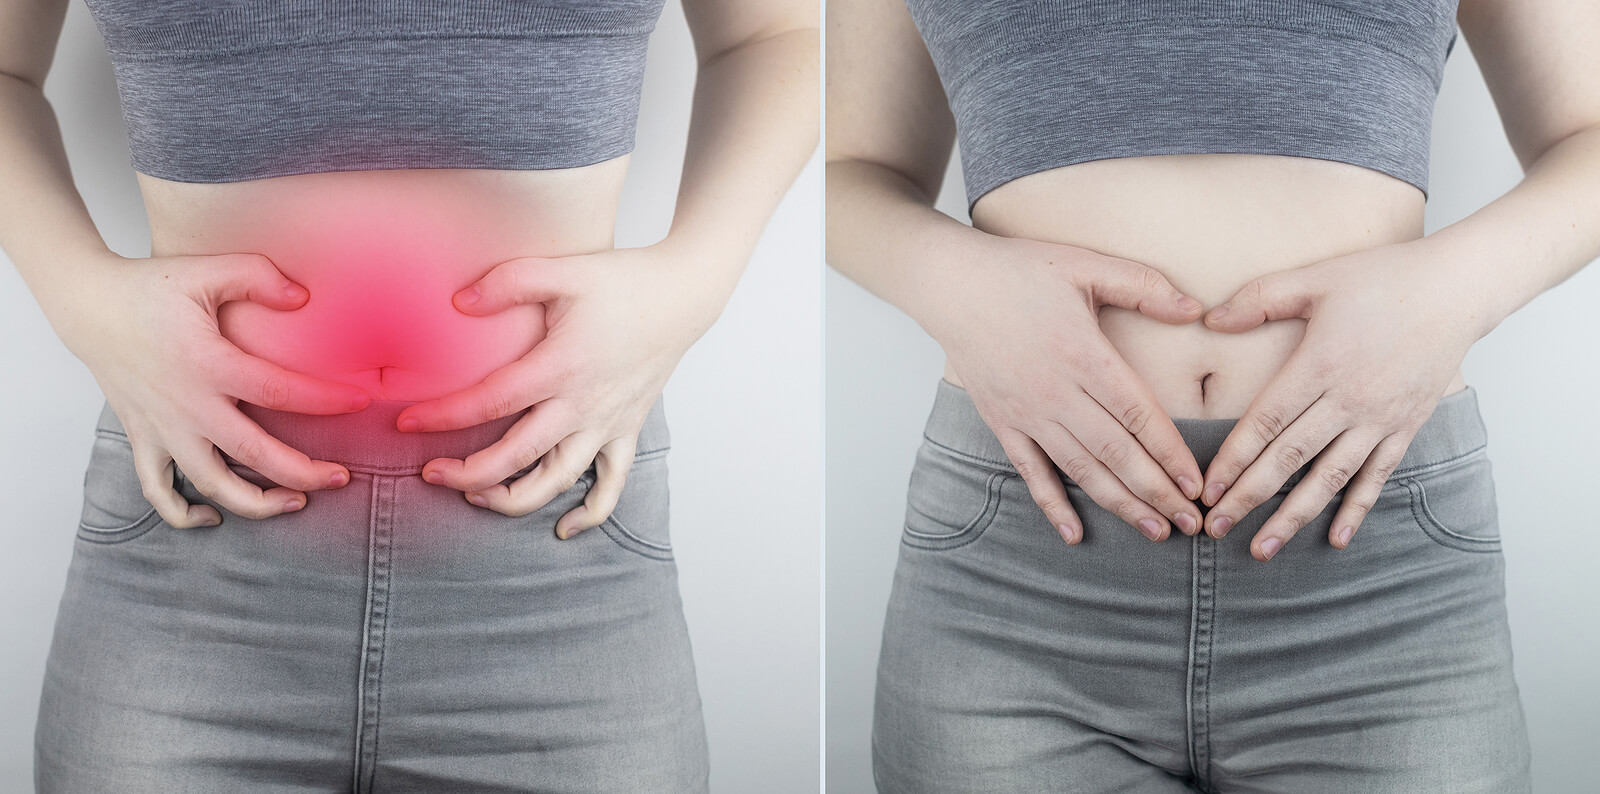 Before And After Abdominal Pain. On The Left Is A Photo Of How T